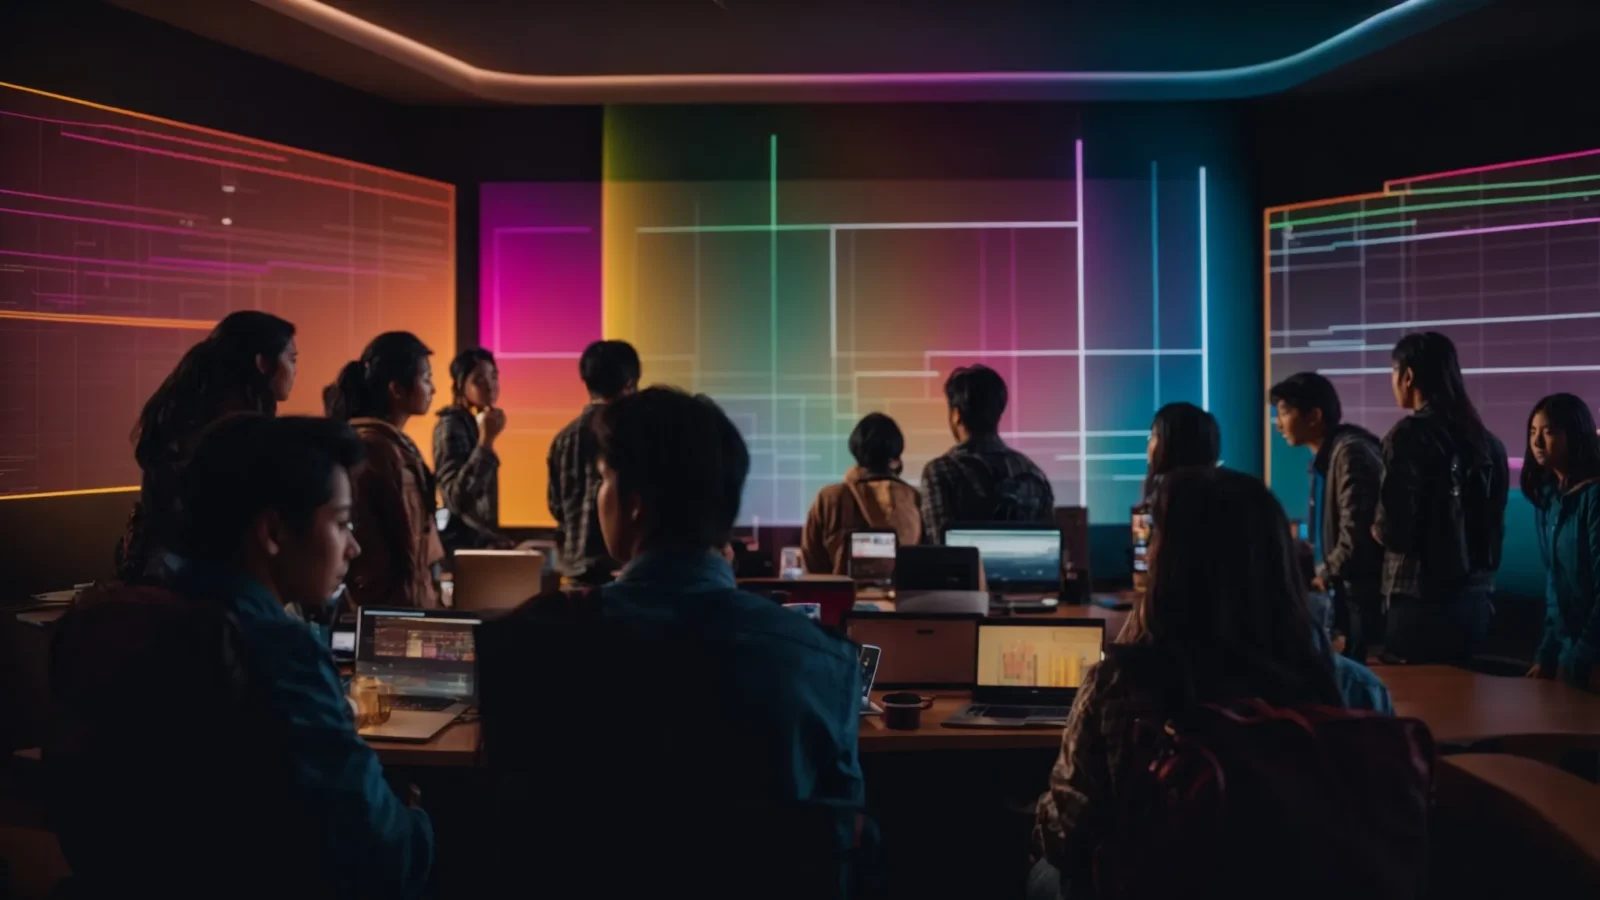 a camera focuses on a group of people gathered around a computer, discussing a colorful graph projected on the screen.